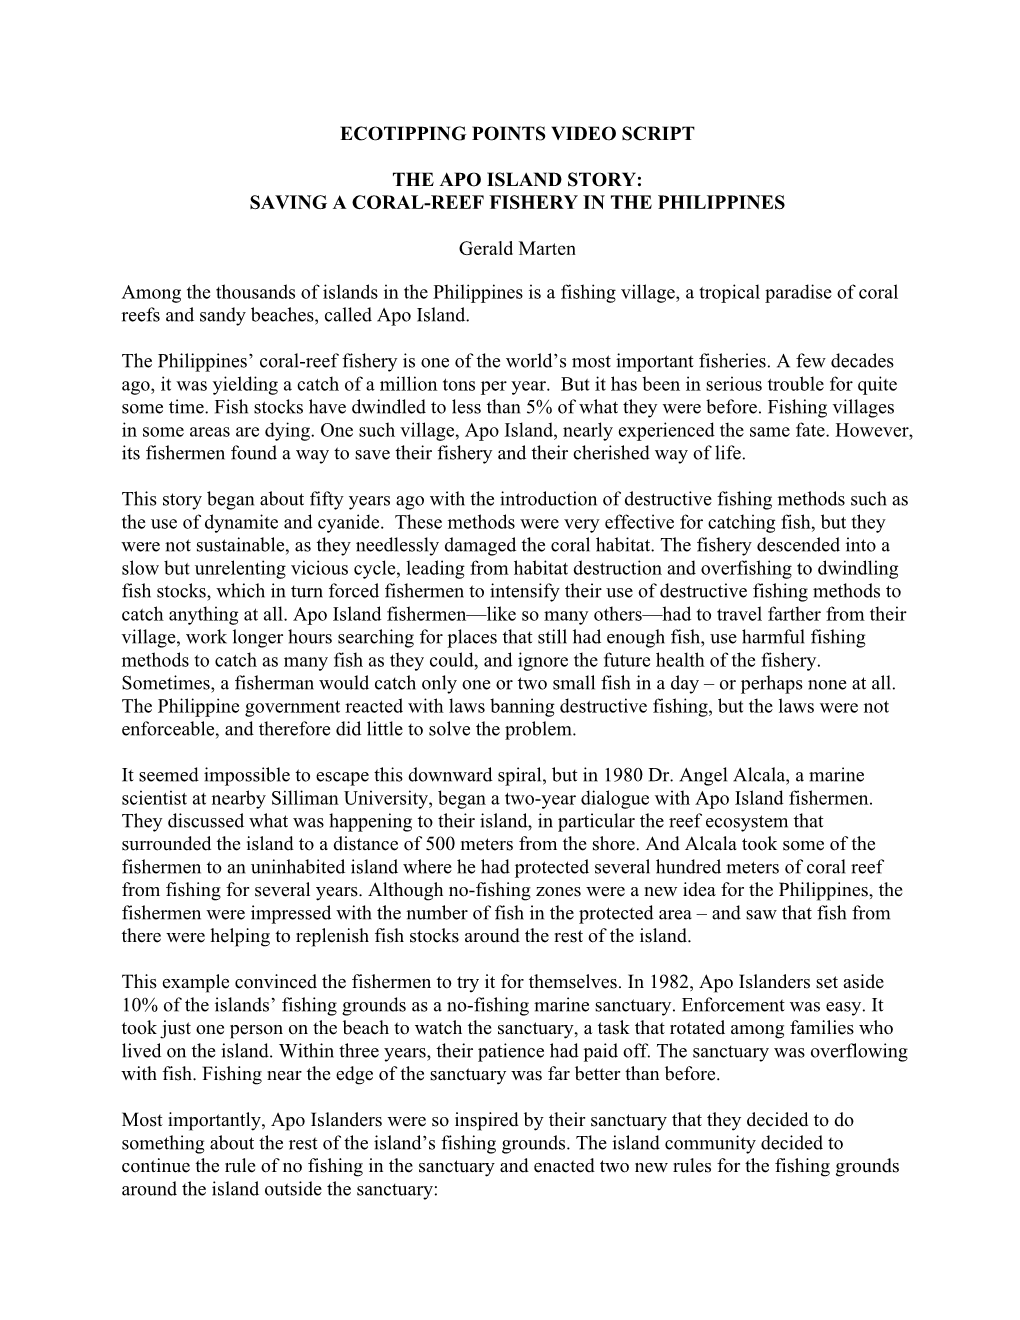 ECOTIPPING POINTS VIDEO SCRIPT the APO ISLAND STORY: SAVING a CORAL-REEF FISHERY in the PHILIPPINES Gerald Marten Among the Thou